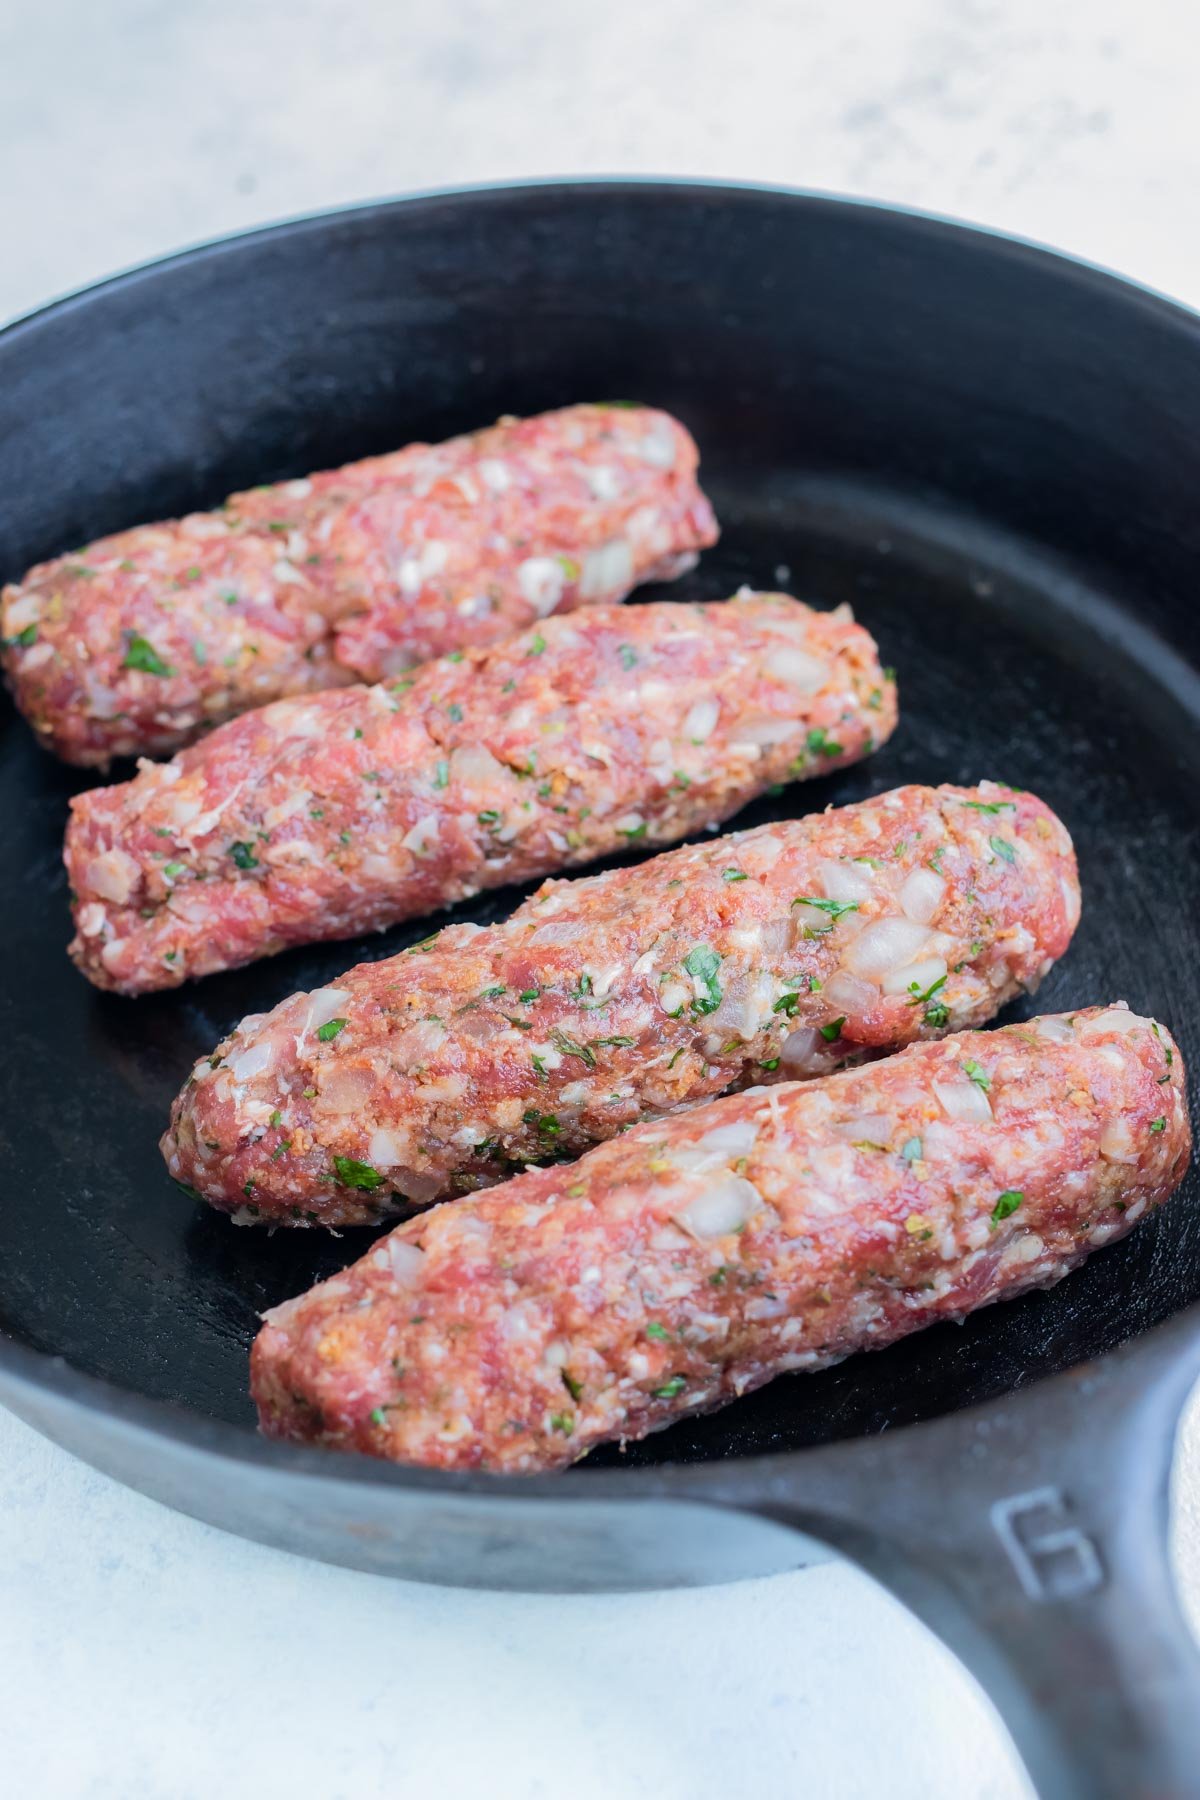 Lamb kofta is seared and cooked on the stove.